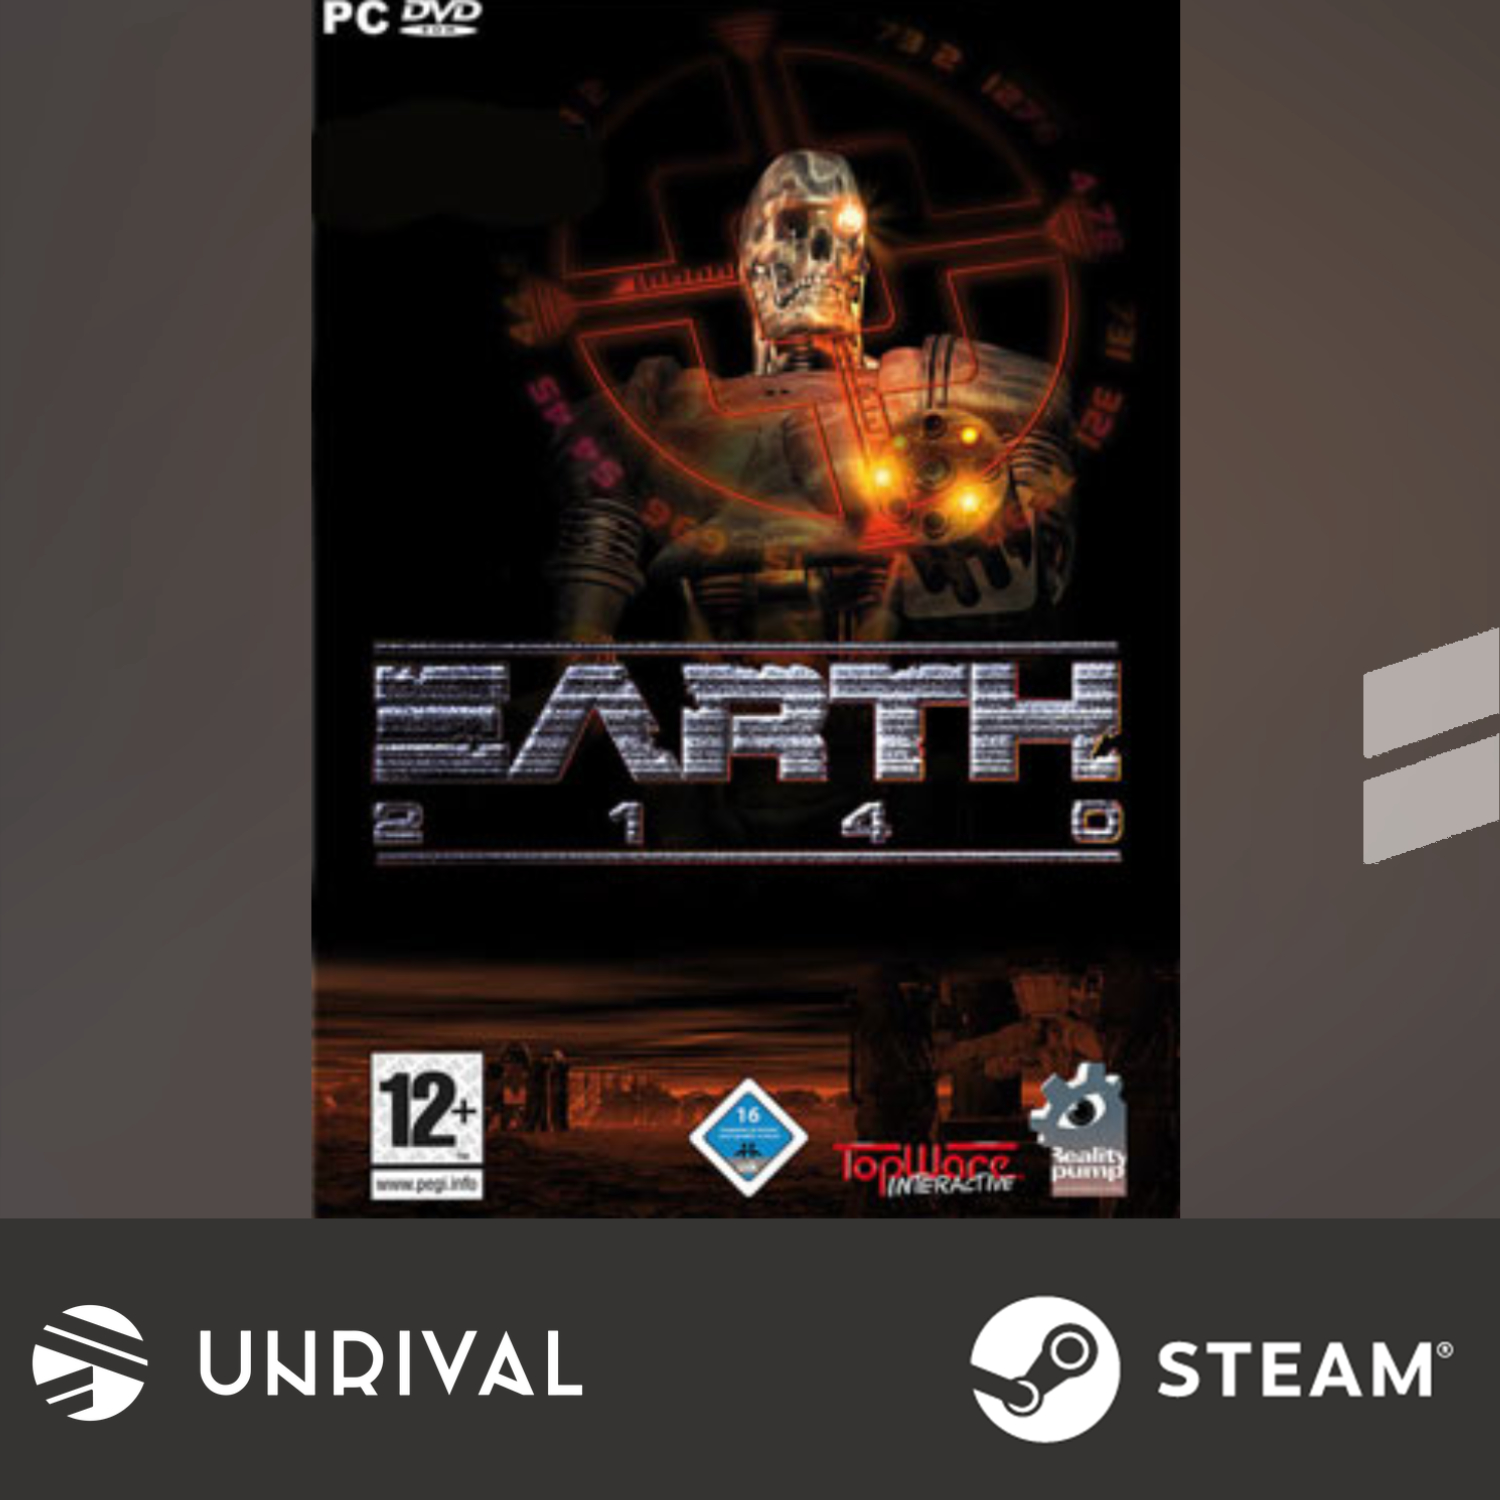 Earth 2140 PC Digital Download Game (Multiplayer) - Unrival